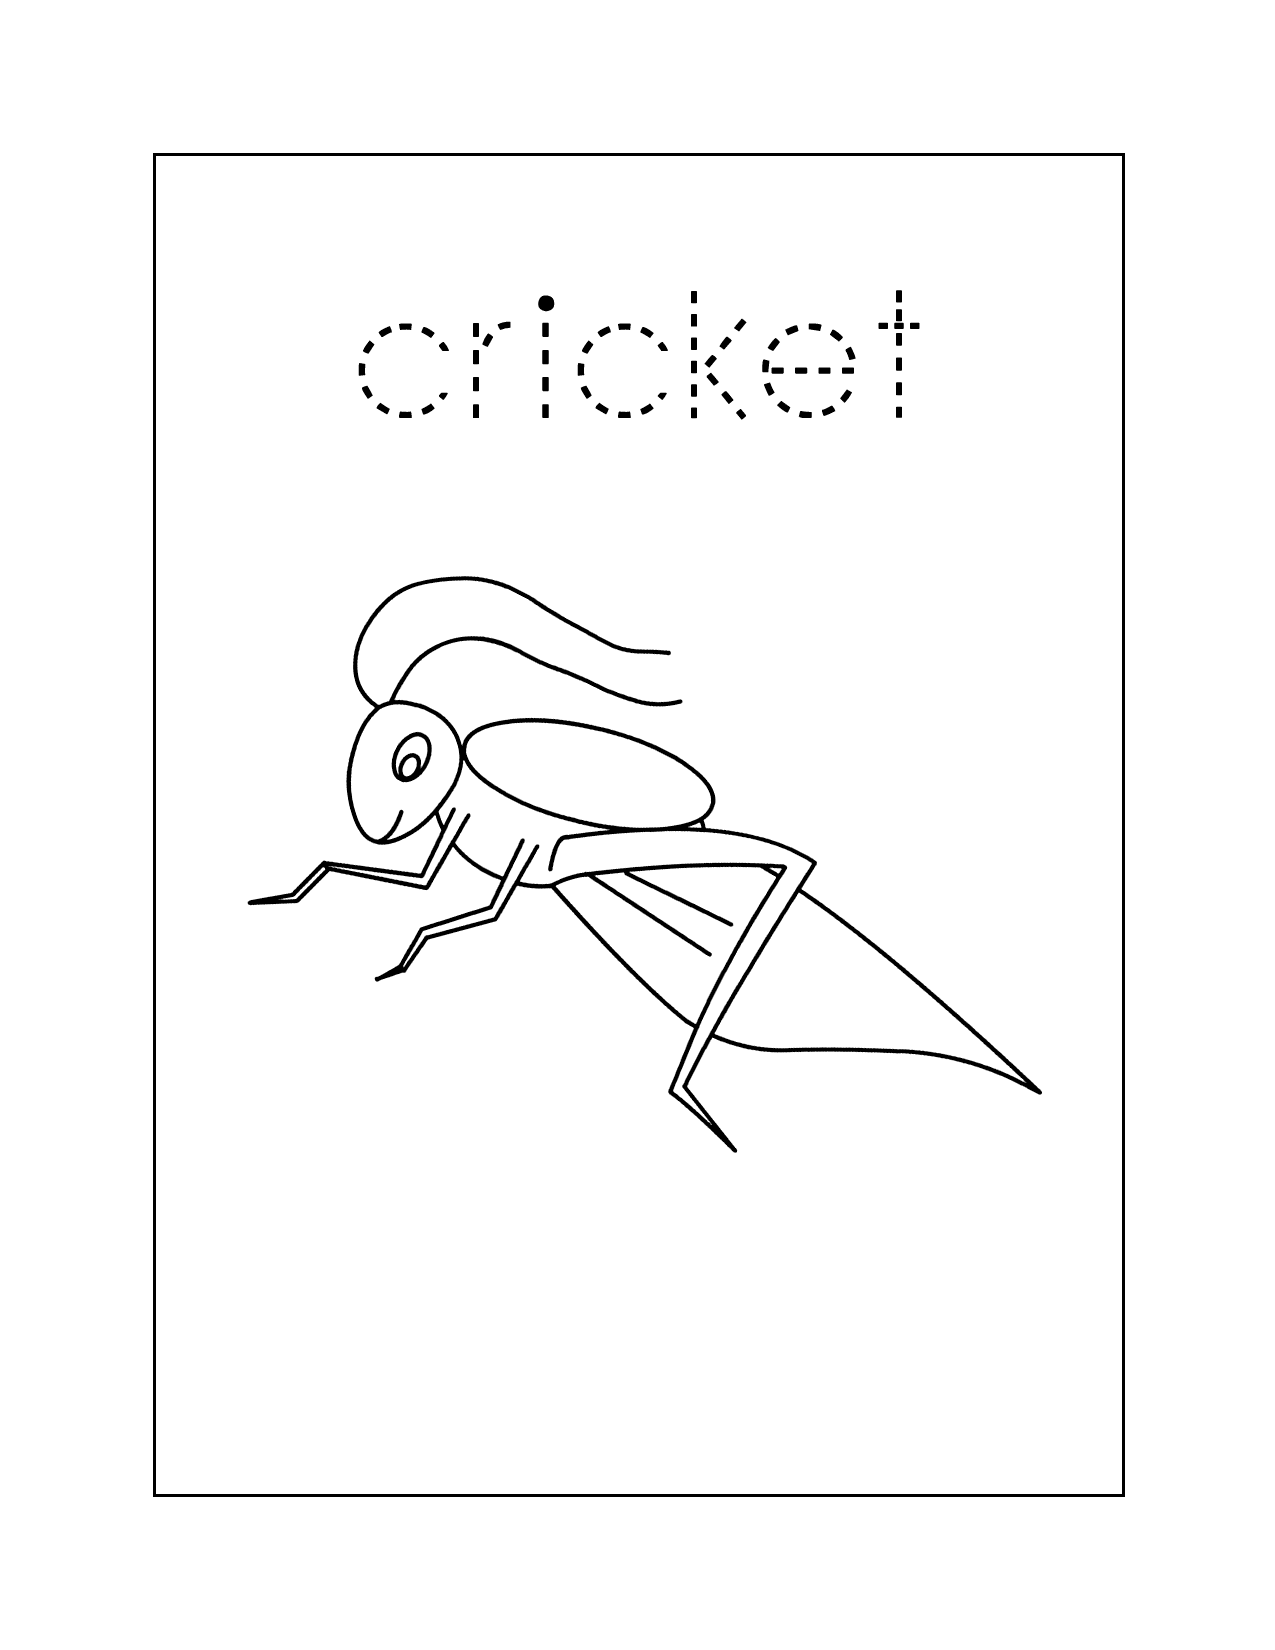 Cricket Spelling And Coloring Sheet